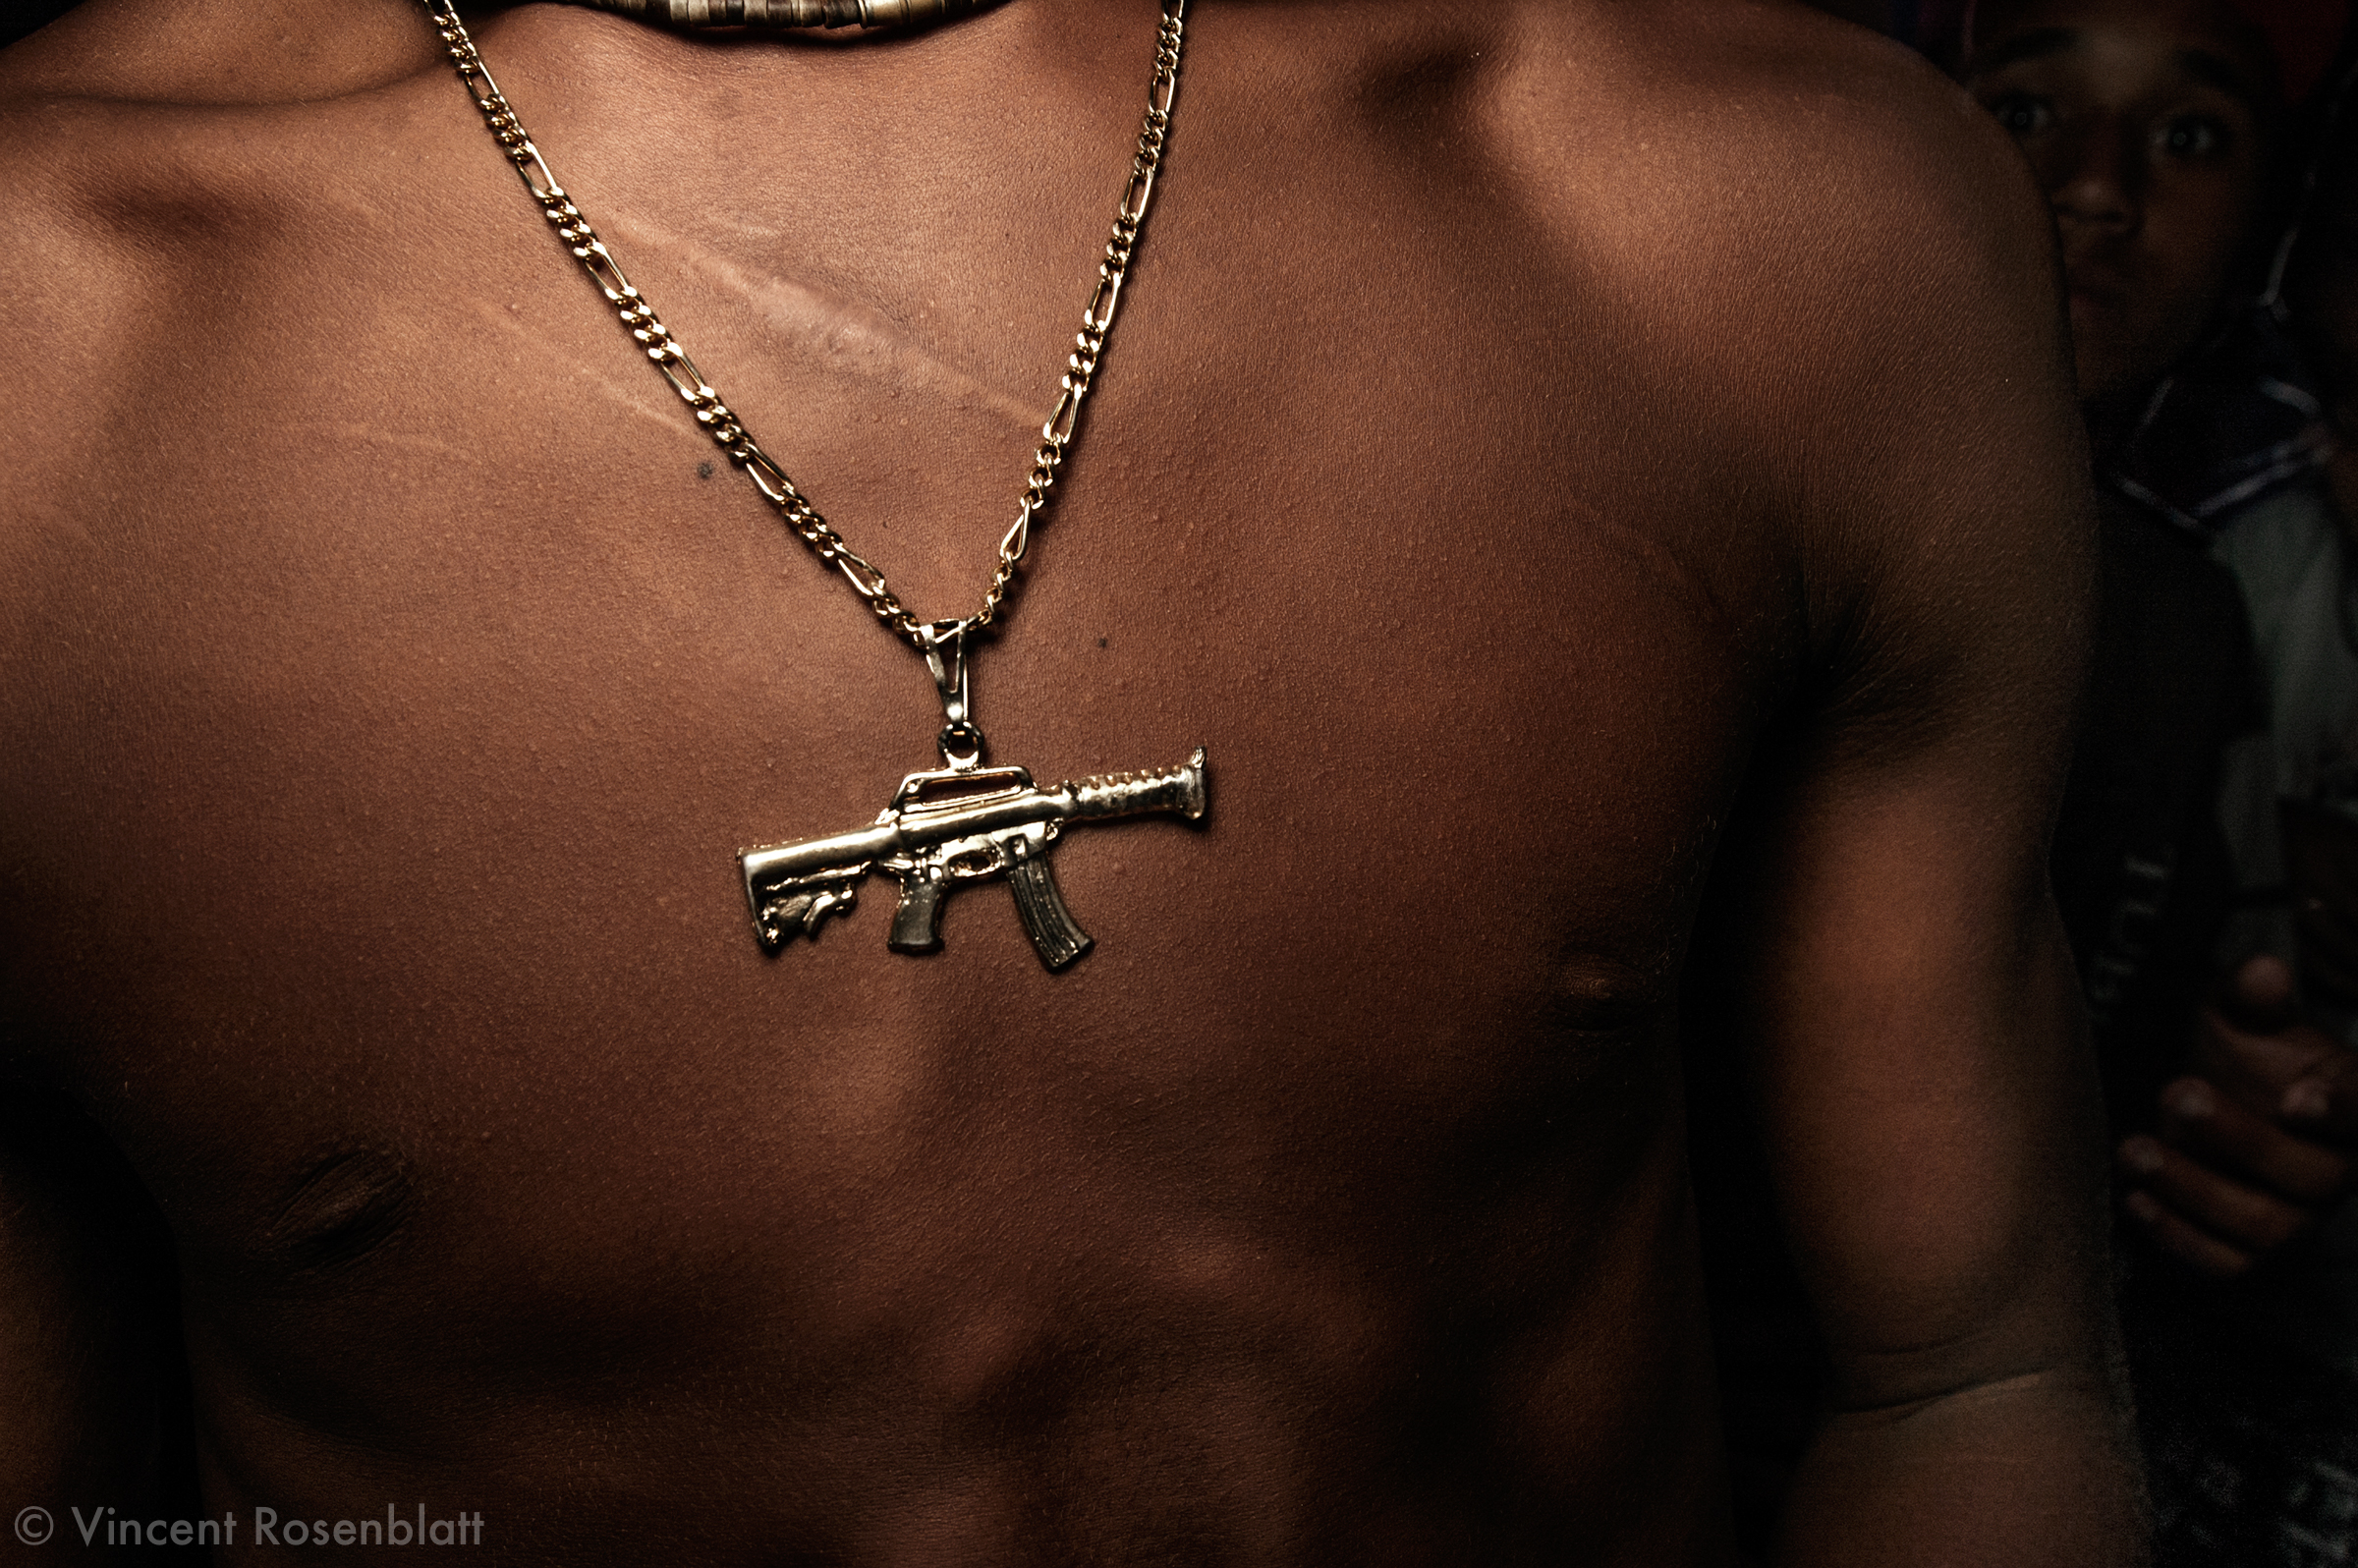  Submachine gun pendant ,  Baile of Curtisomrio soundsystem, downtown Rio de Janeiro.  A hint to the omnipresence of weapons on favelas' territory..The Funk carioca movement is fashion and look as well : the boys try and identify themselves to the ga